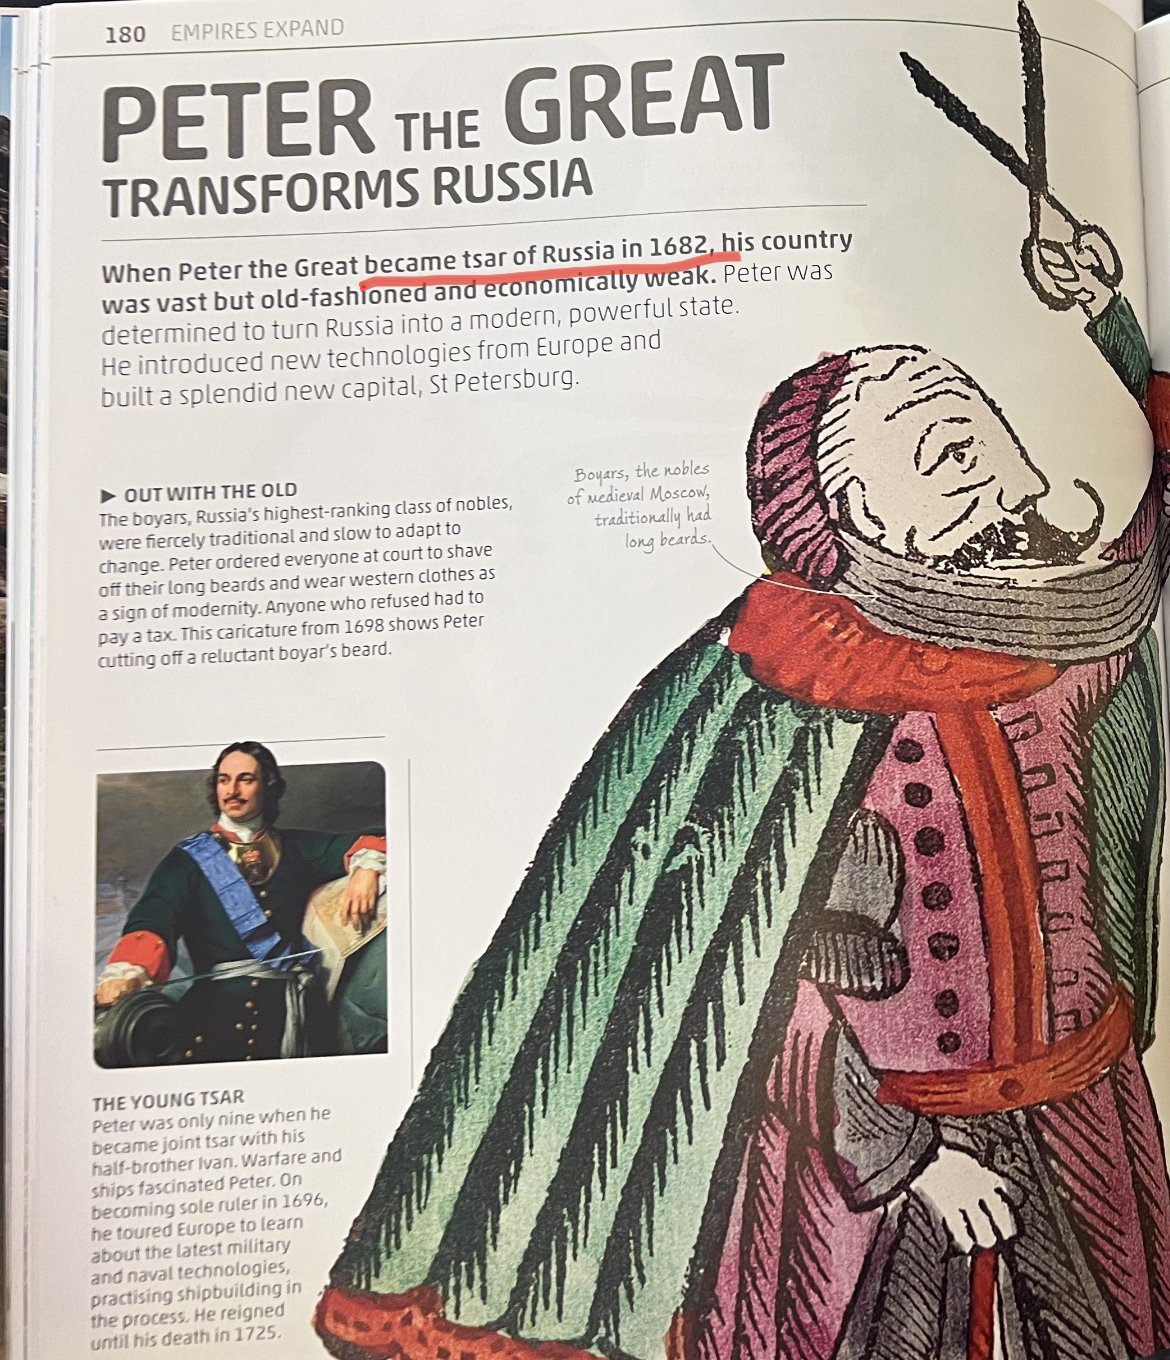 Explanatorium of History, Dorling Kindersley, 2021. I wish someone could explain to explainers: Peter I became a tsar of Muscovy in 1682 and not Russia. He rebranded Muscovy into Russia only some 39 years later